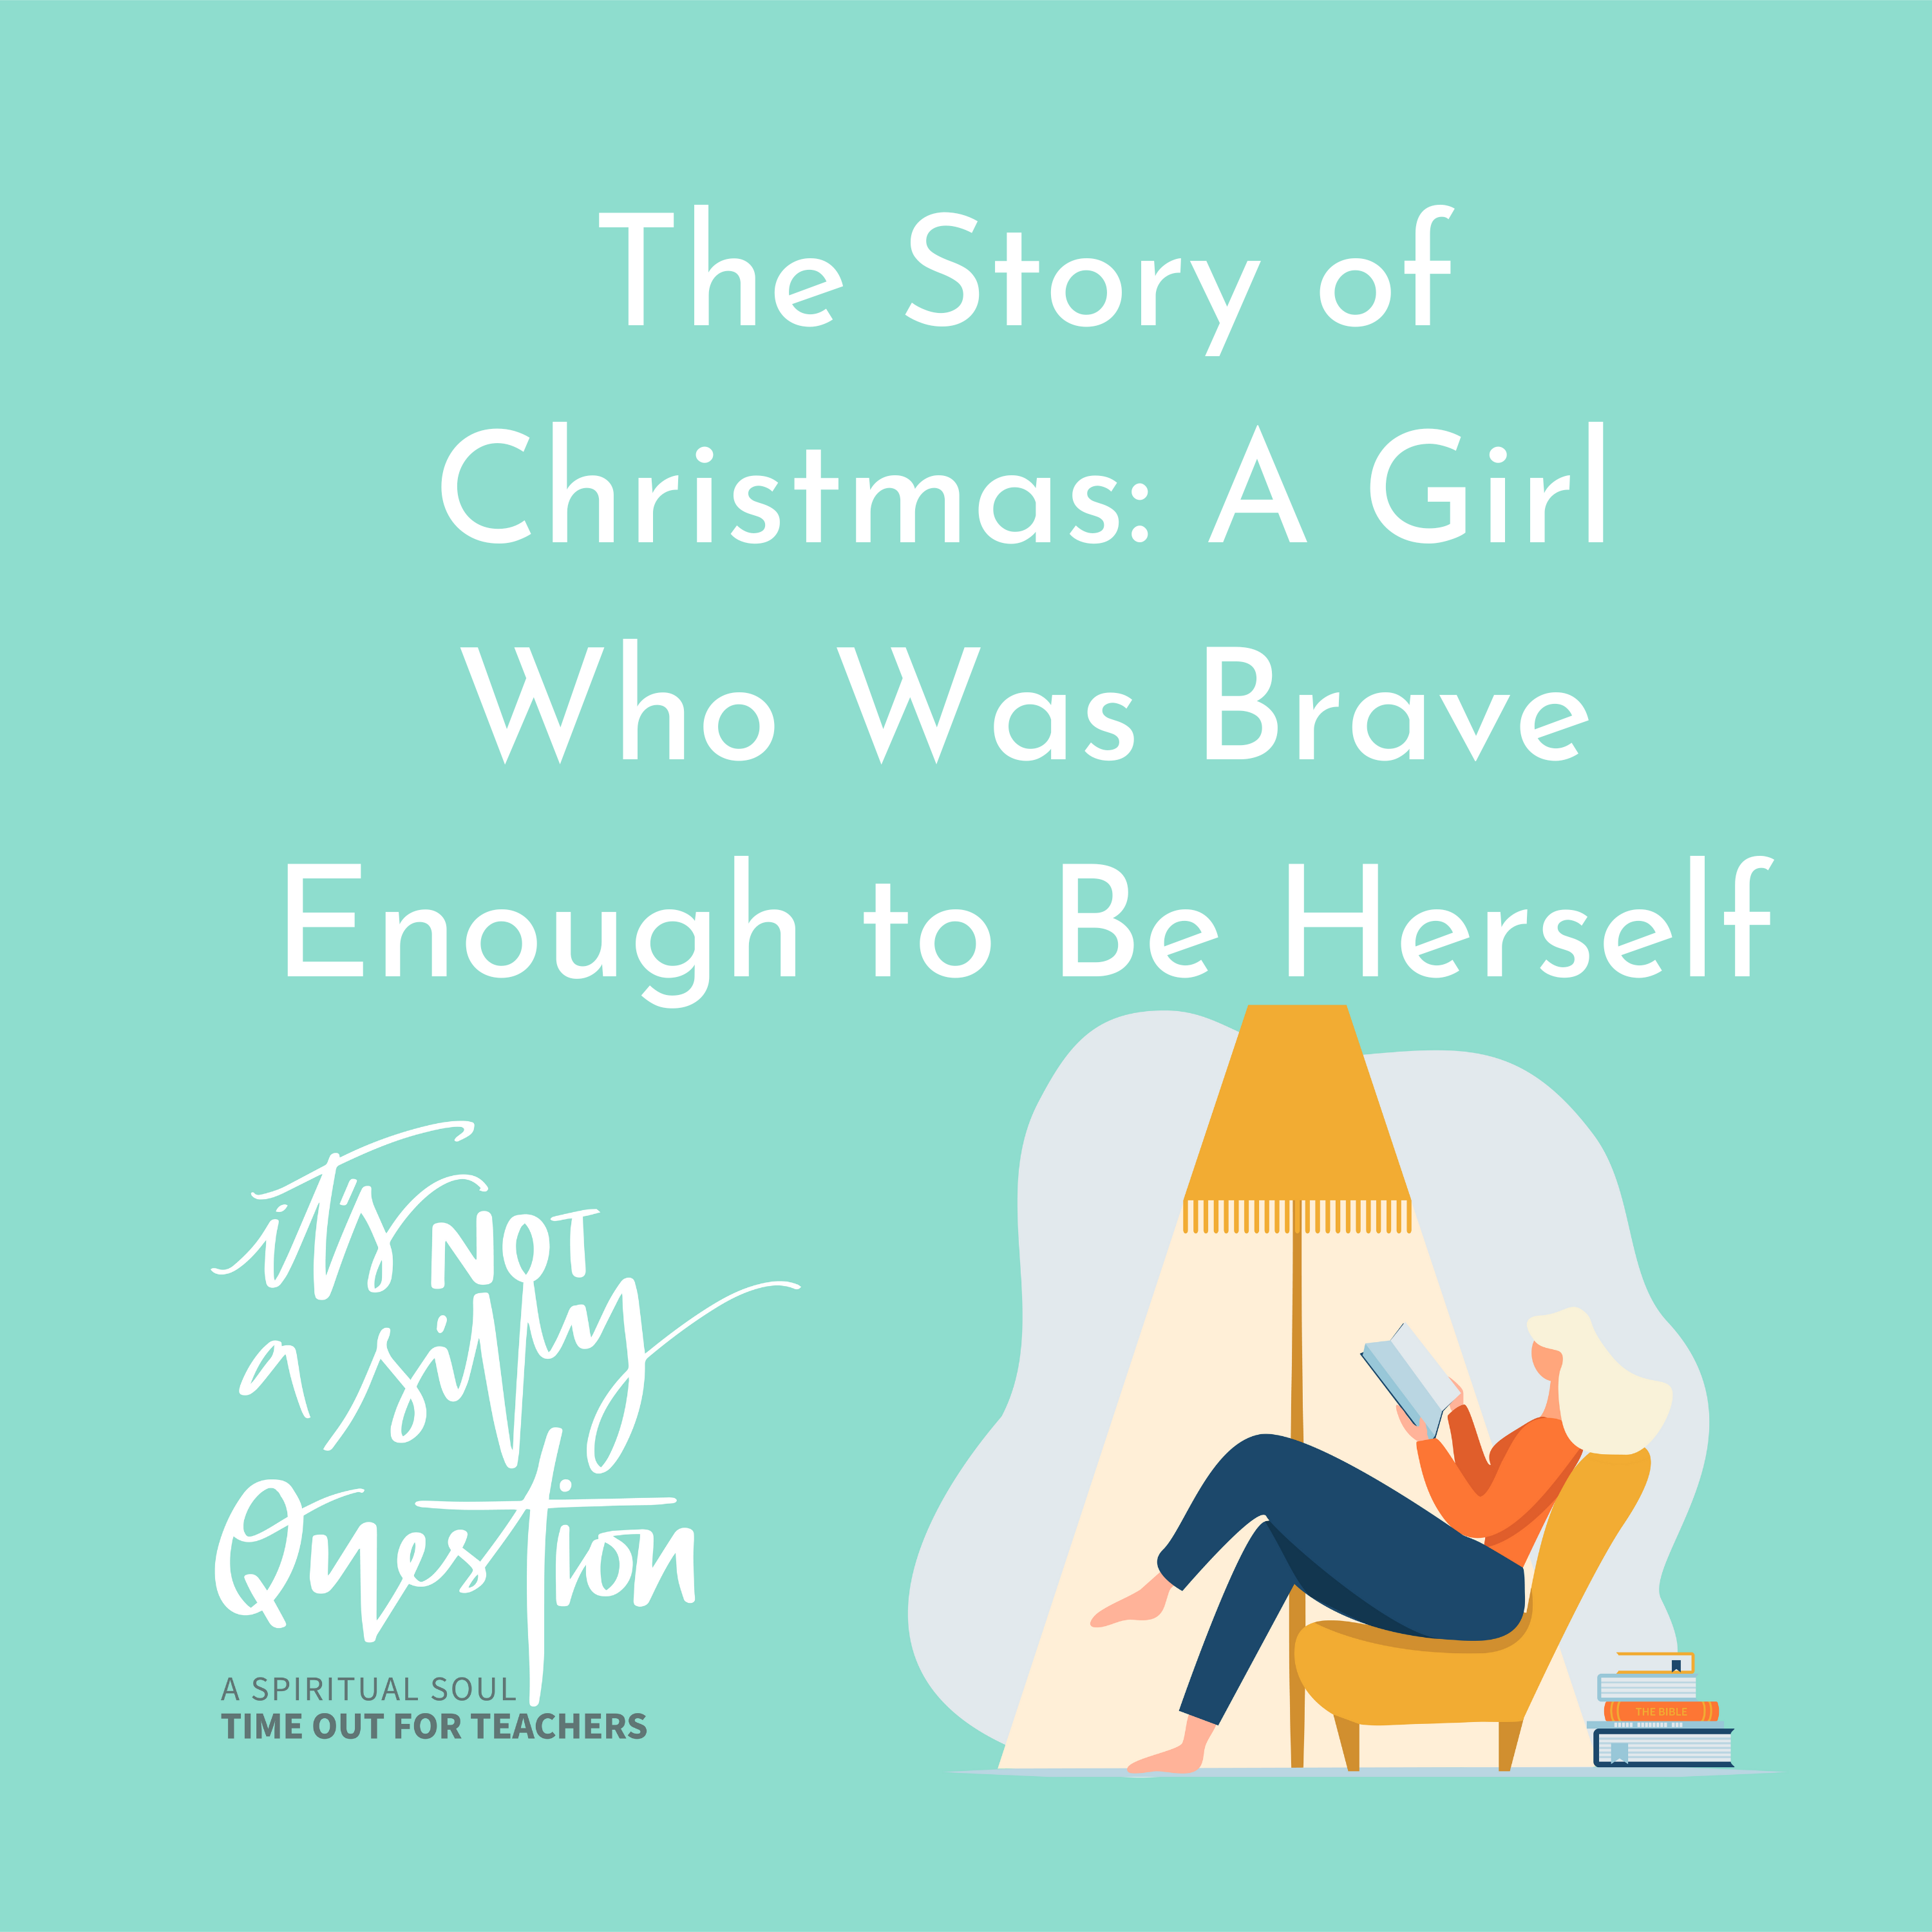 THE STORY OF CHRISTMAS: A Girl Who Was Brave Enough to Be Herself